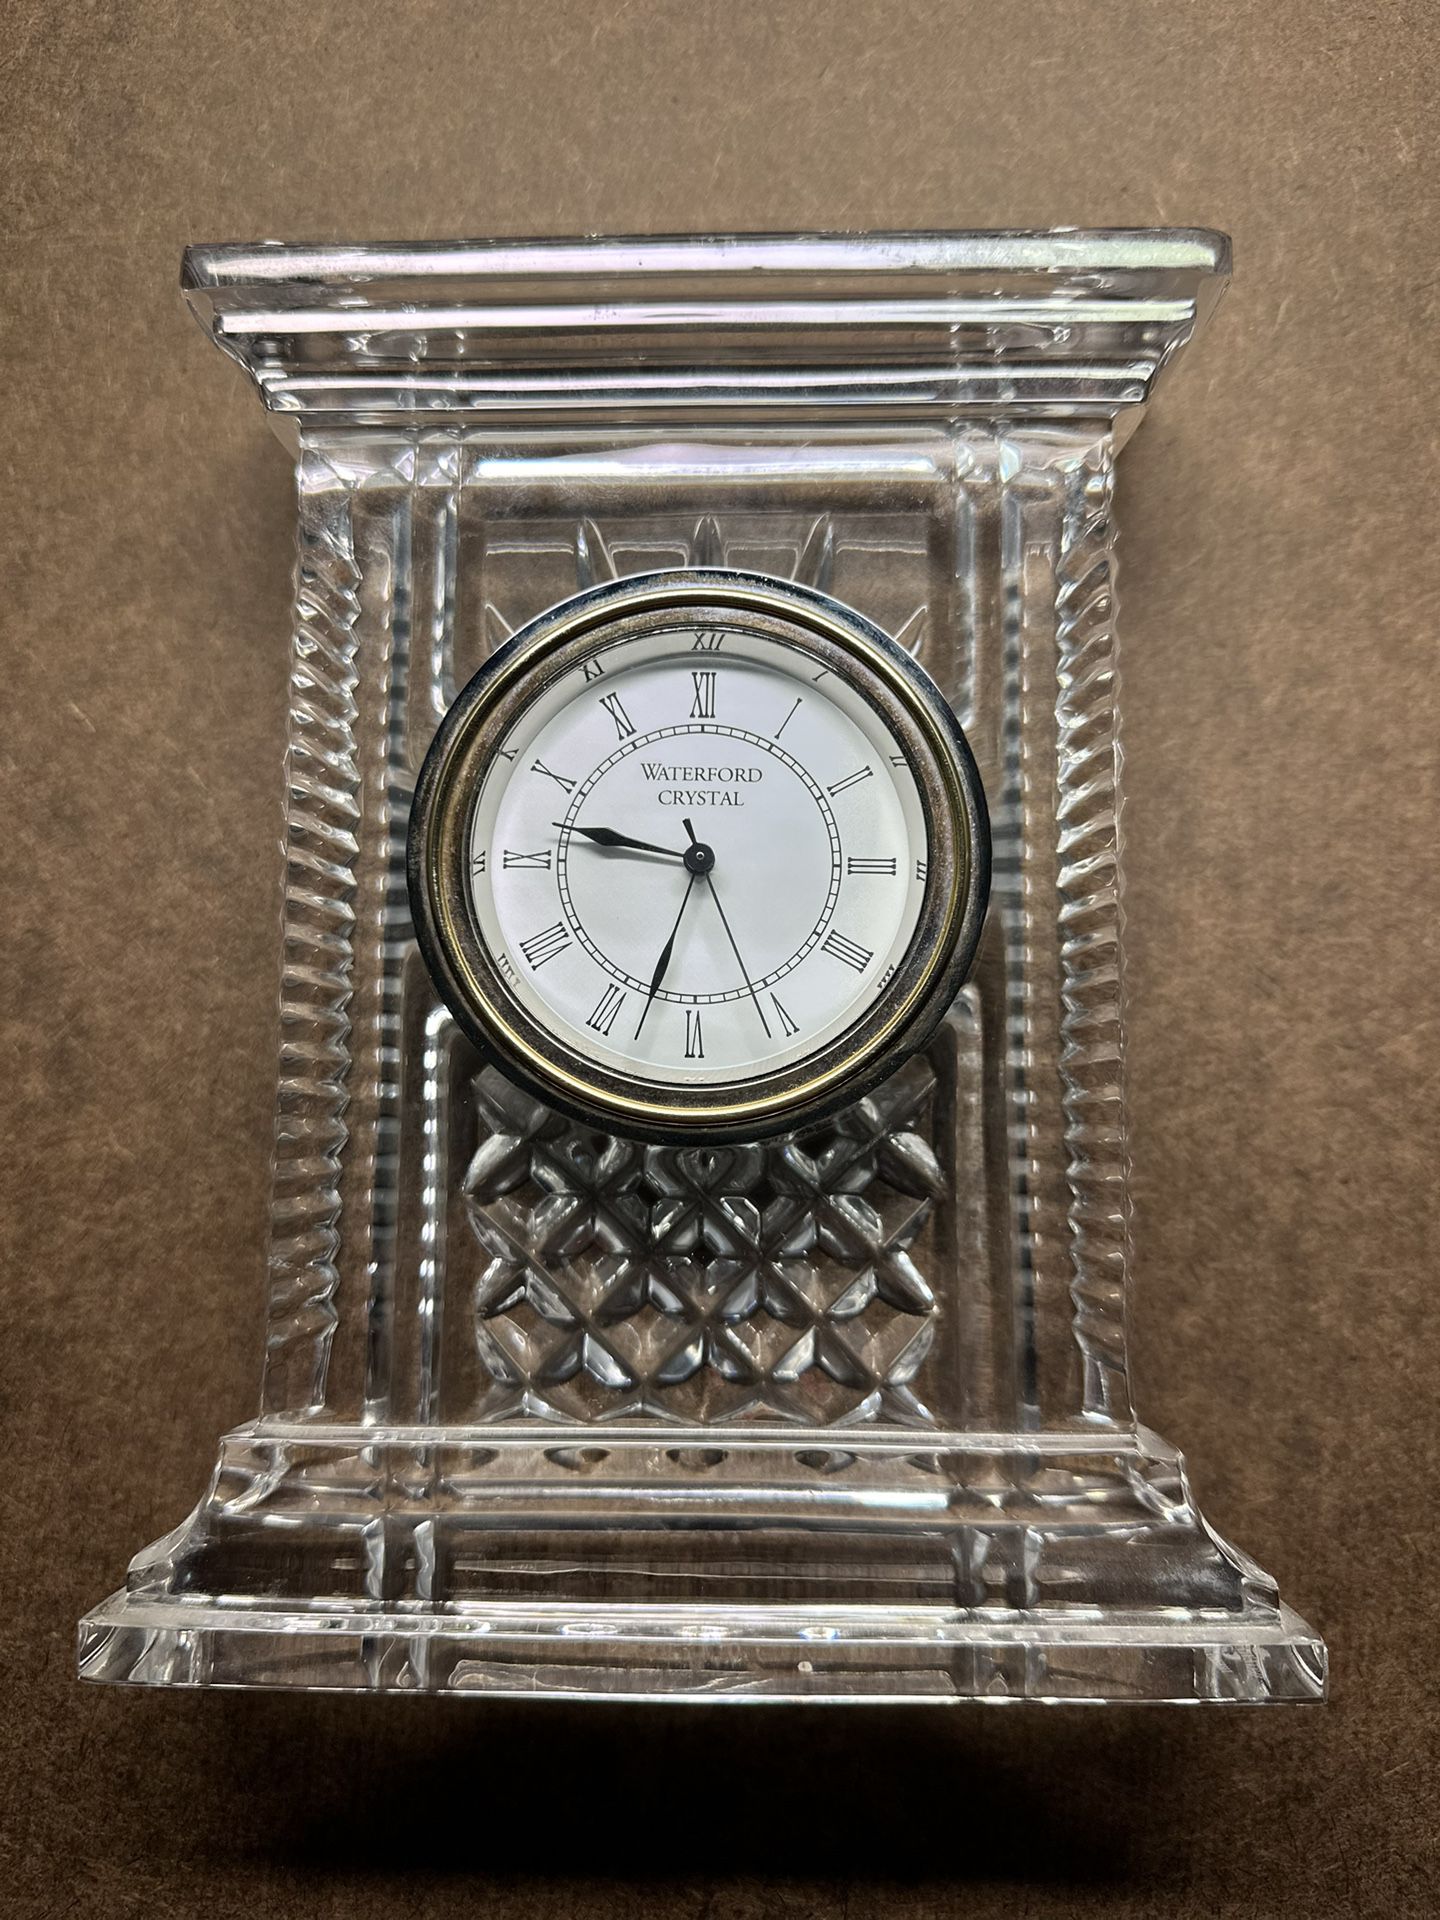 Waterford Crystal mantel clock preowned